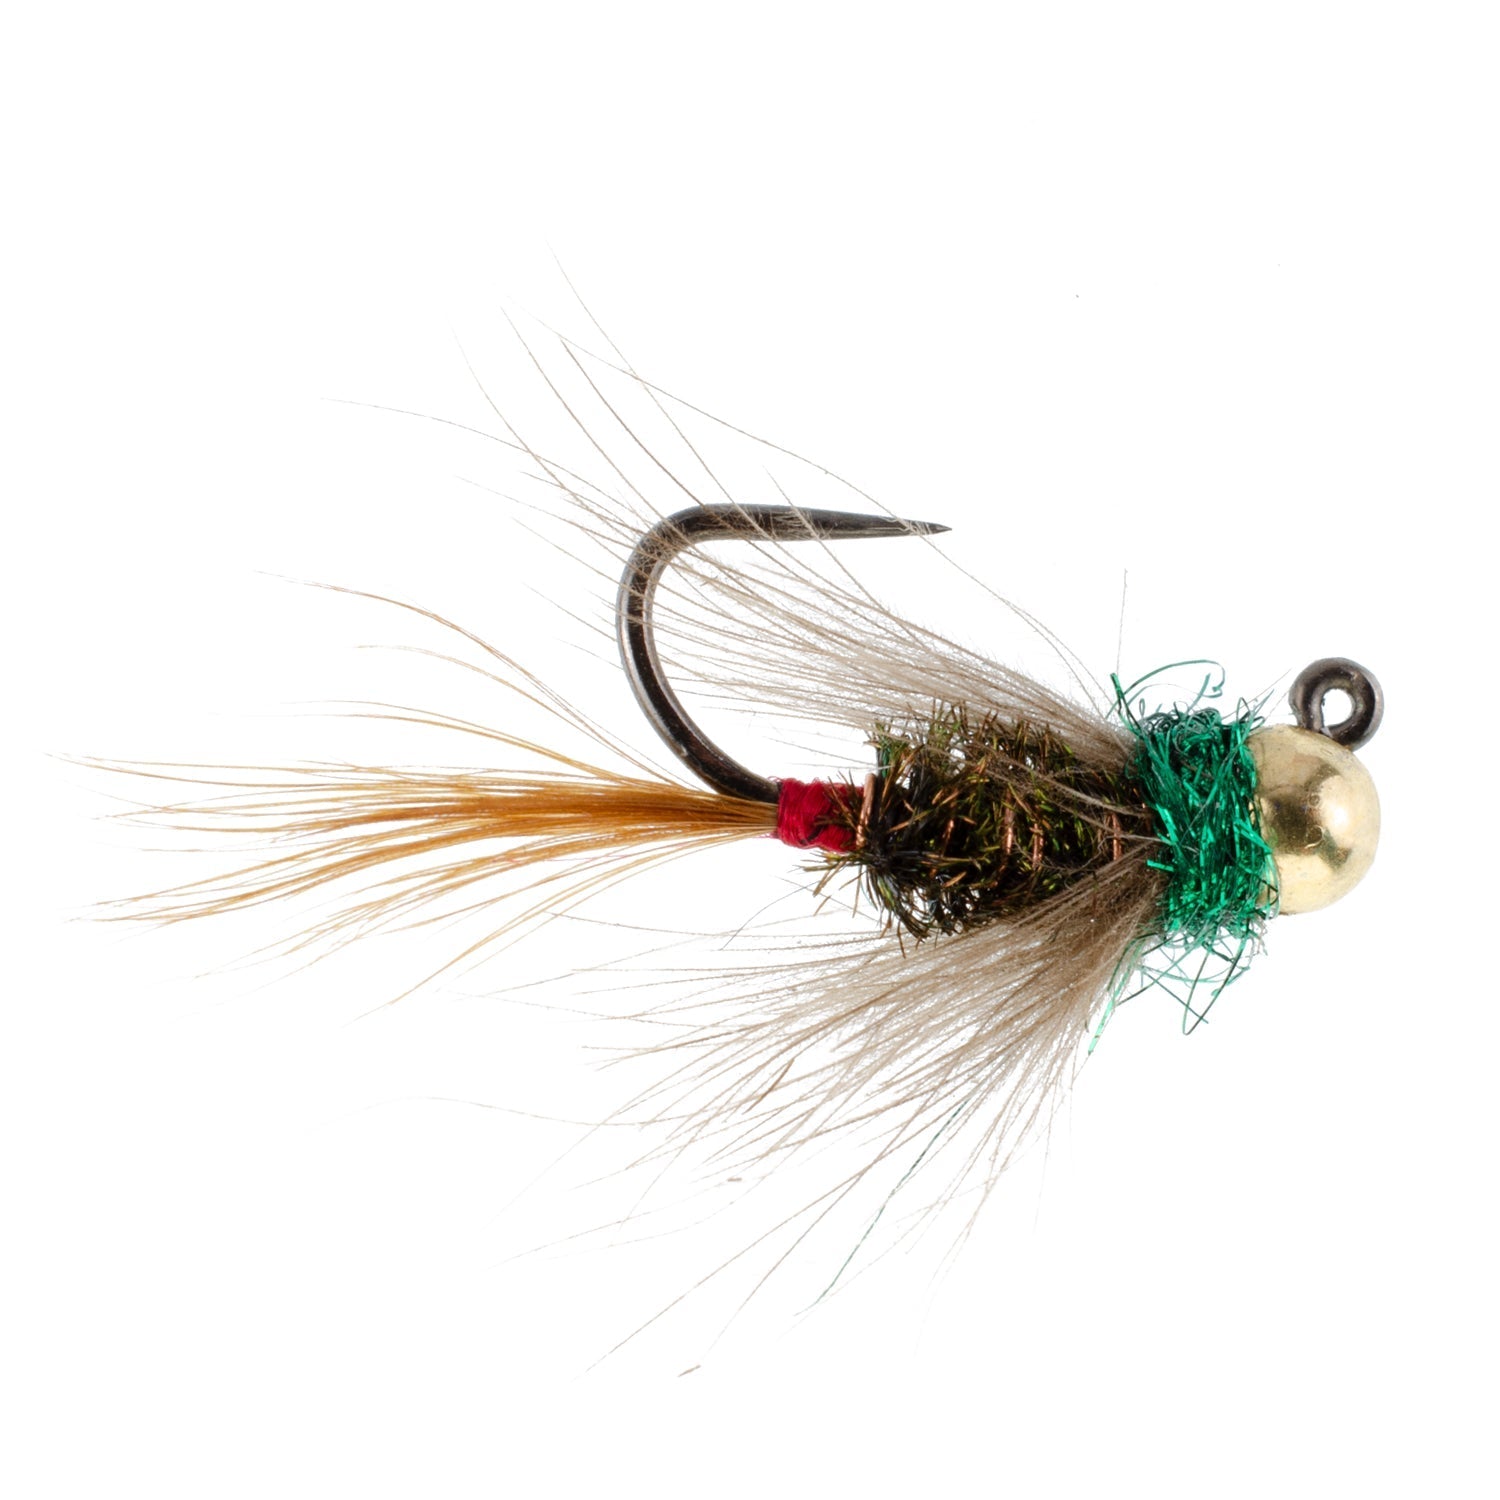 Tungsten Bead Tactical CDC Frenchie Czech Nymph Euro Nymphing Fly - 1 docena de moscas tamaño 14 